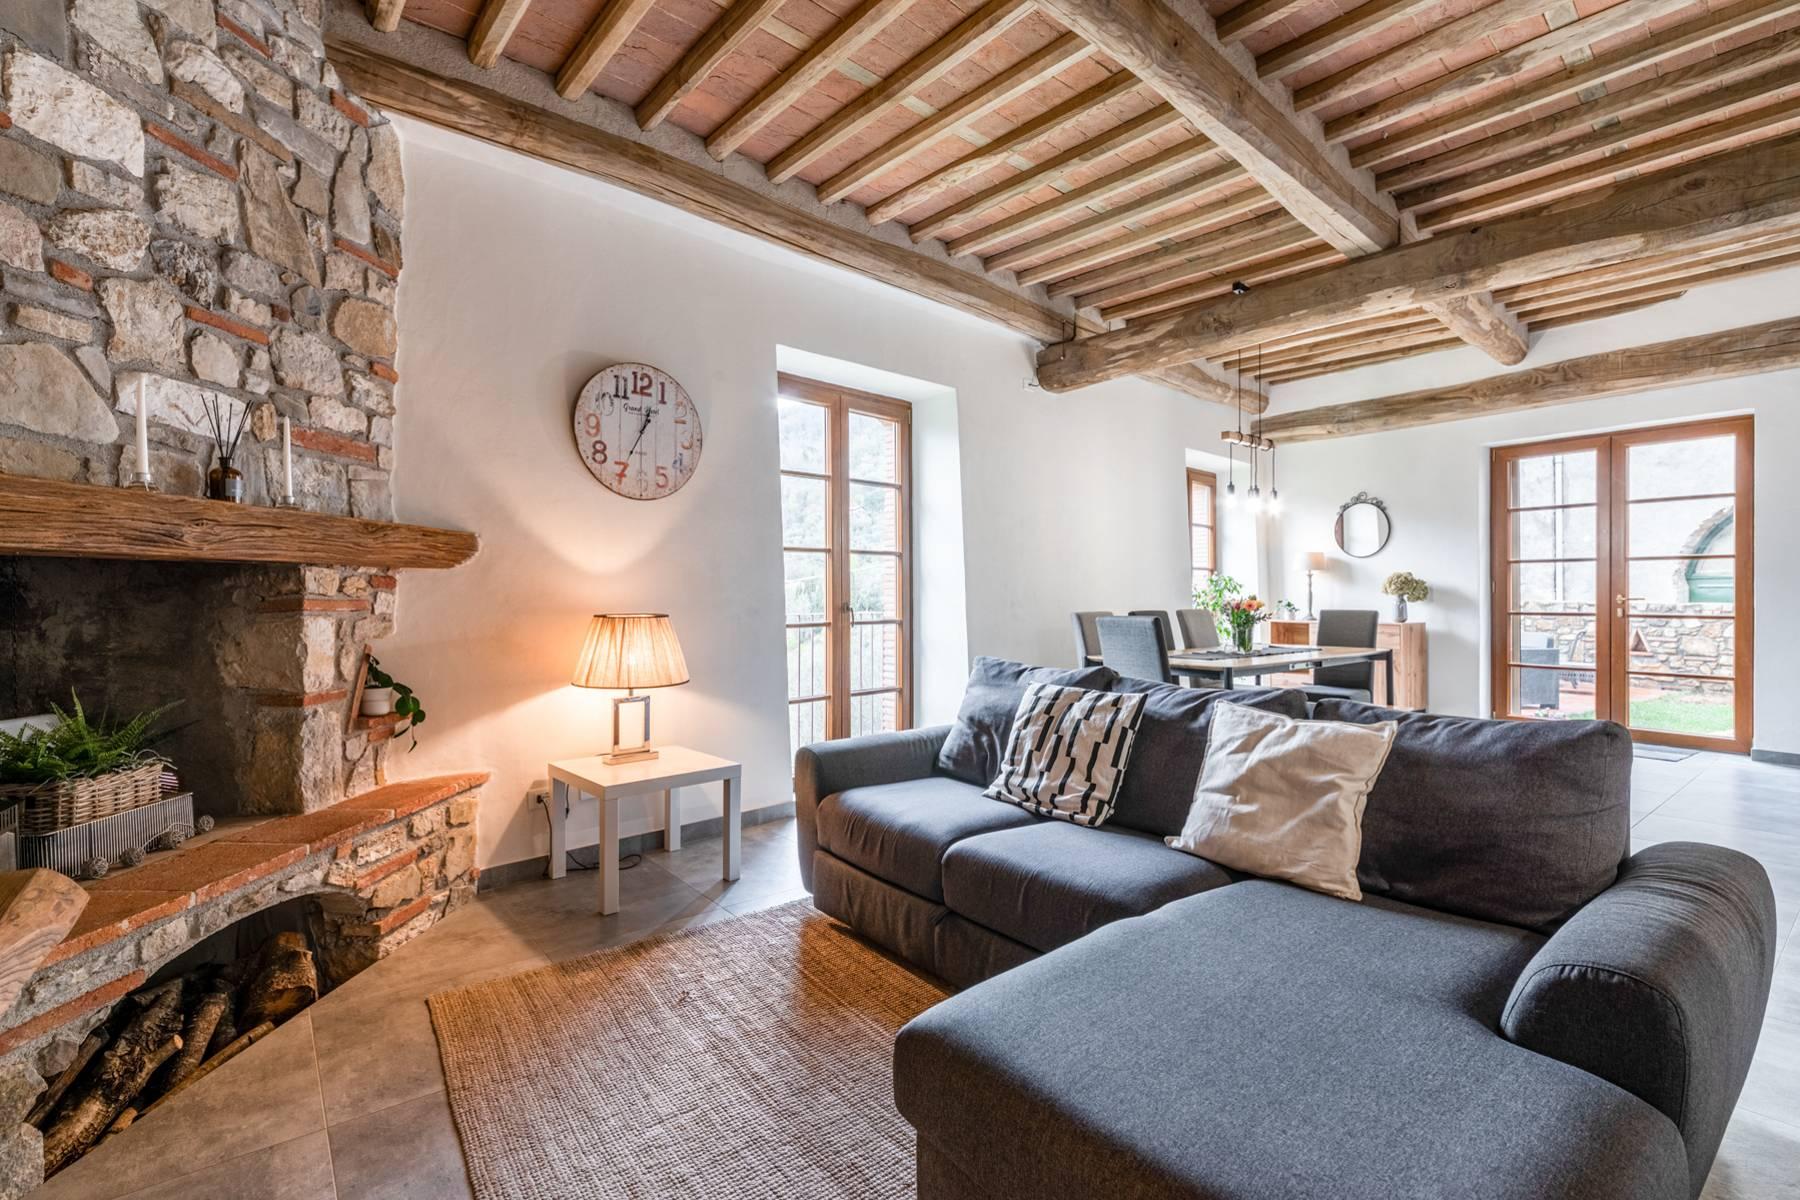 A lovingly restored semi-detached house on the hills of Lucca - 3